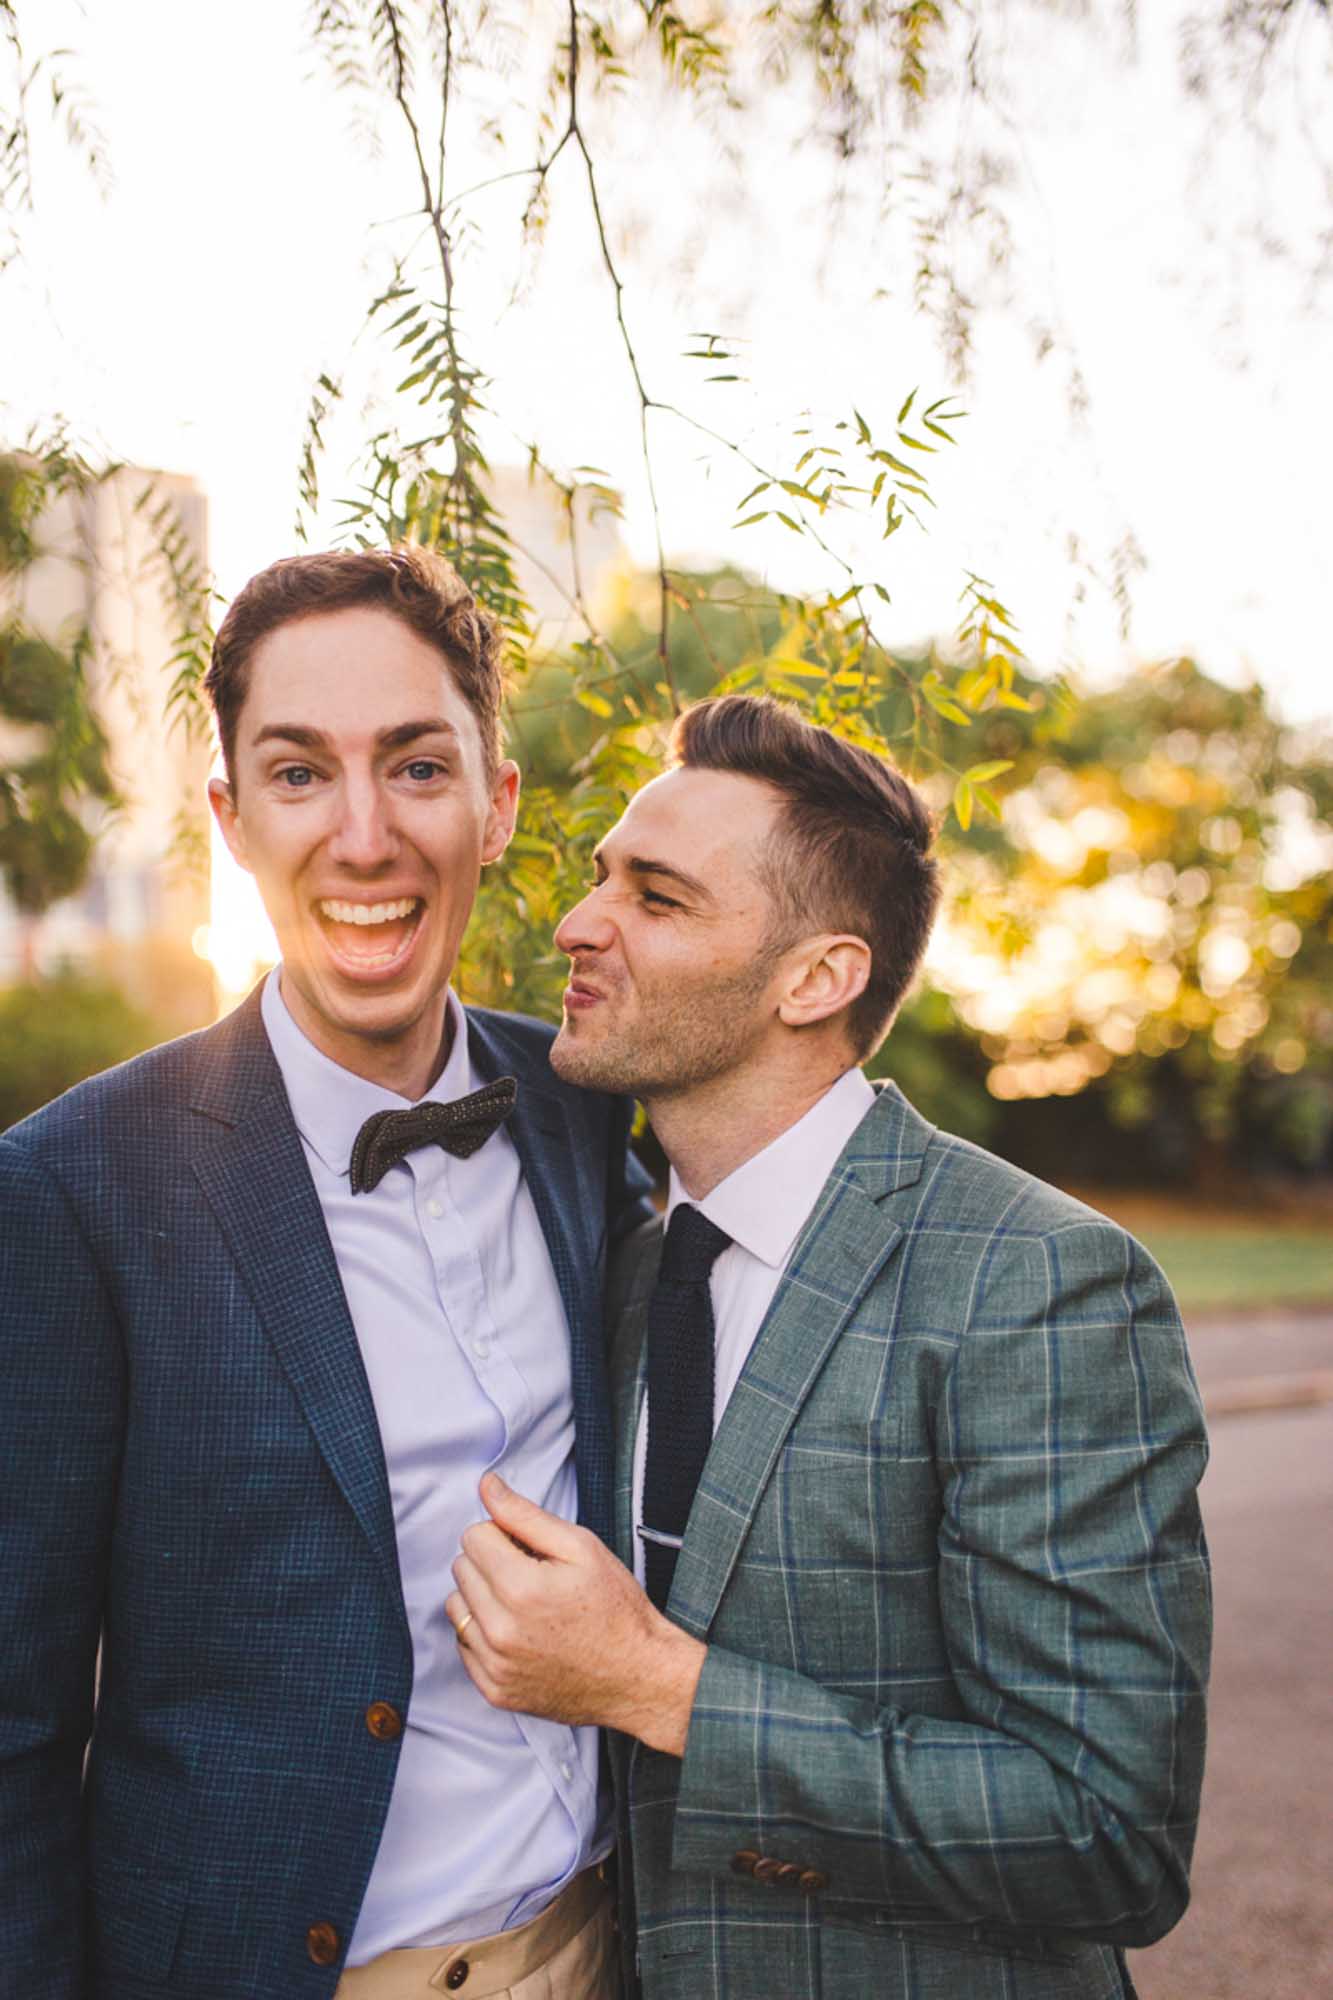 After a four-month engagement, Joel and Thomas married in a Sydney, Australia, microwedding. Photo by Chris Gray Photomedia. Published on Equally Wed, the world's leading LGBTQ+ wedding magazine and wedding directory of LGBTQ+ inclusive wedding vendors and venues